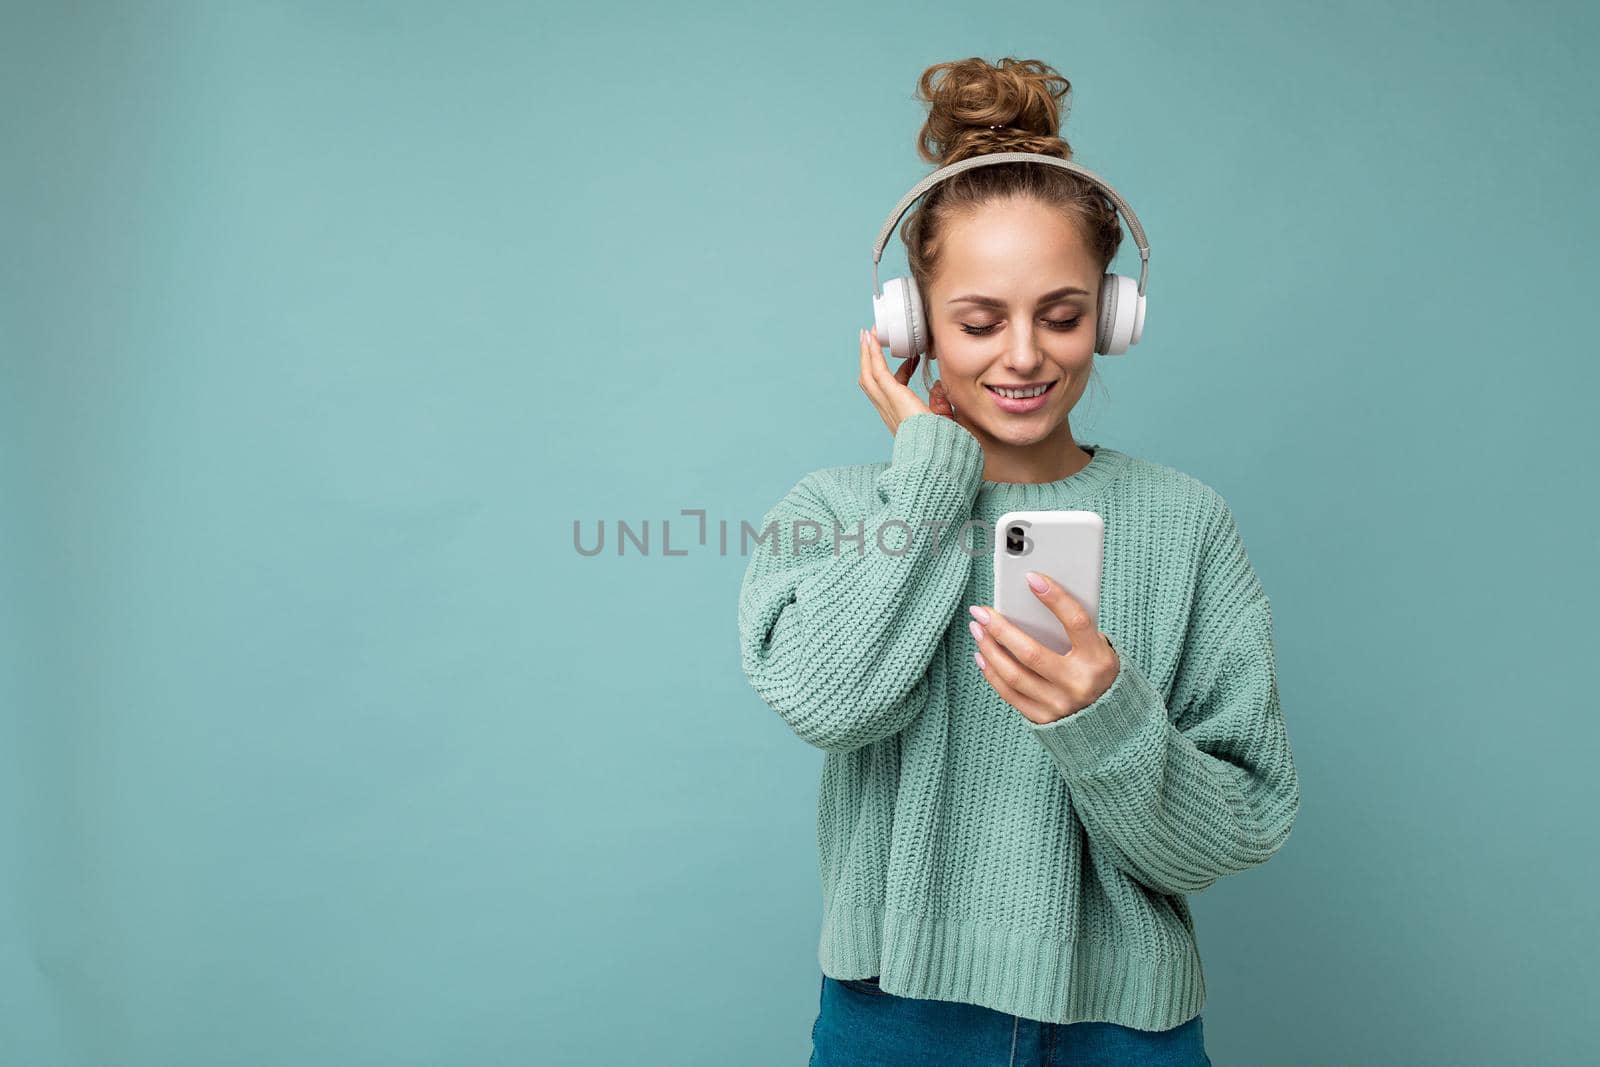 Photo shot of beautiful joyful smiling young female person wearing stylish casual outfit isolated over colorful background wall wearing white bluetooth wireless earphones and listening to music and using mobile phone looking at gadjet display